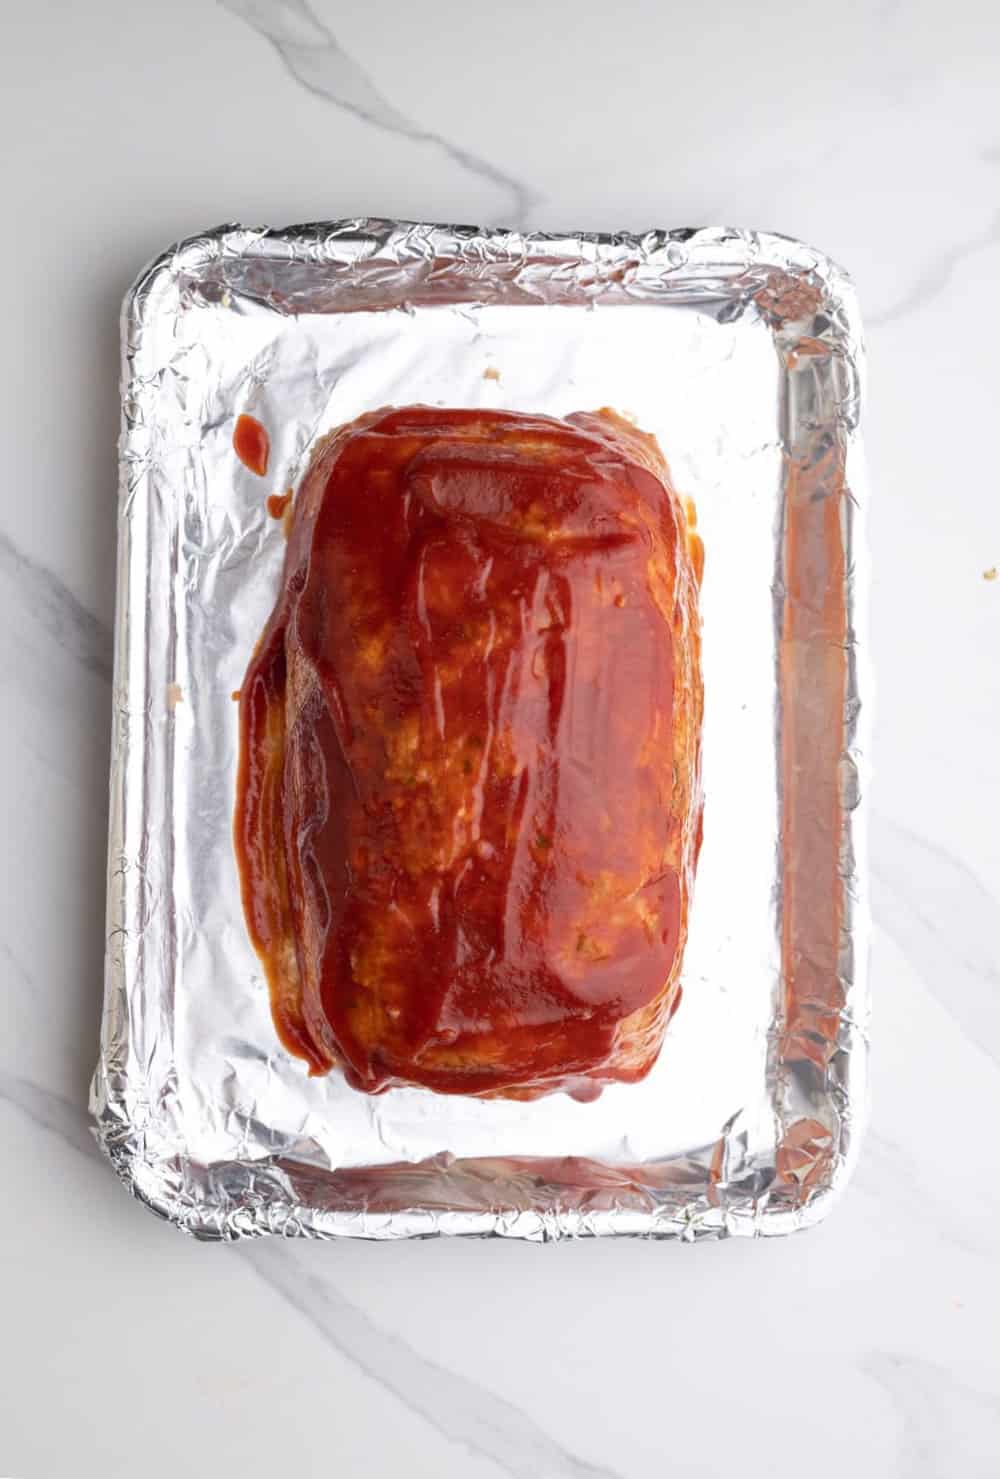 chicken meatloaf covered in a glaze, on a pan.